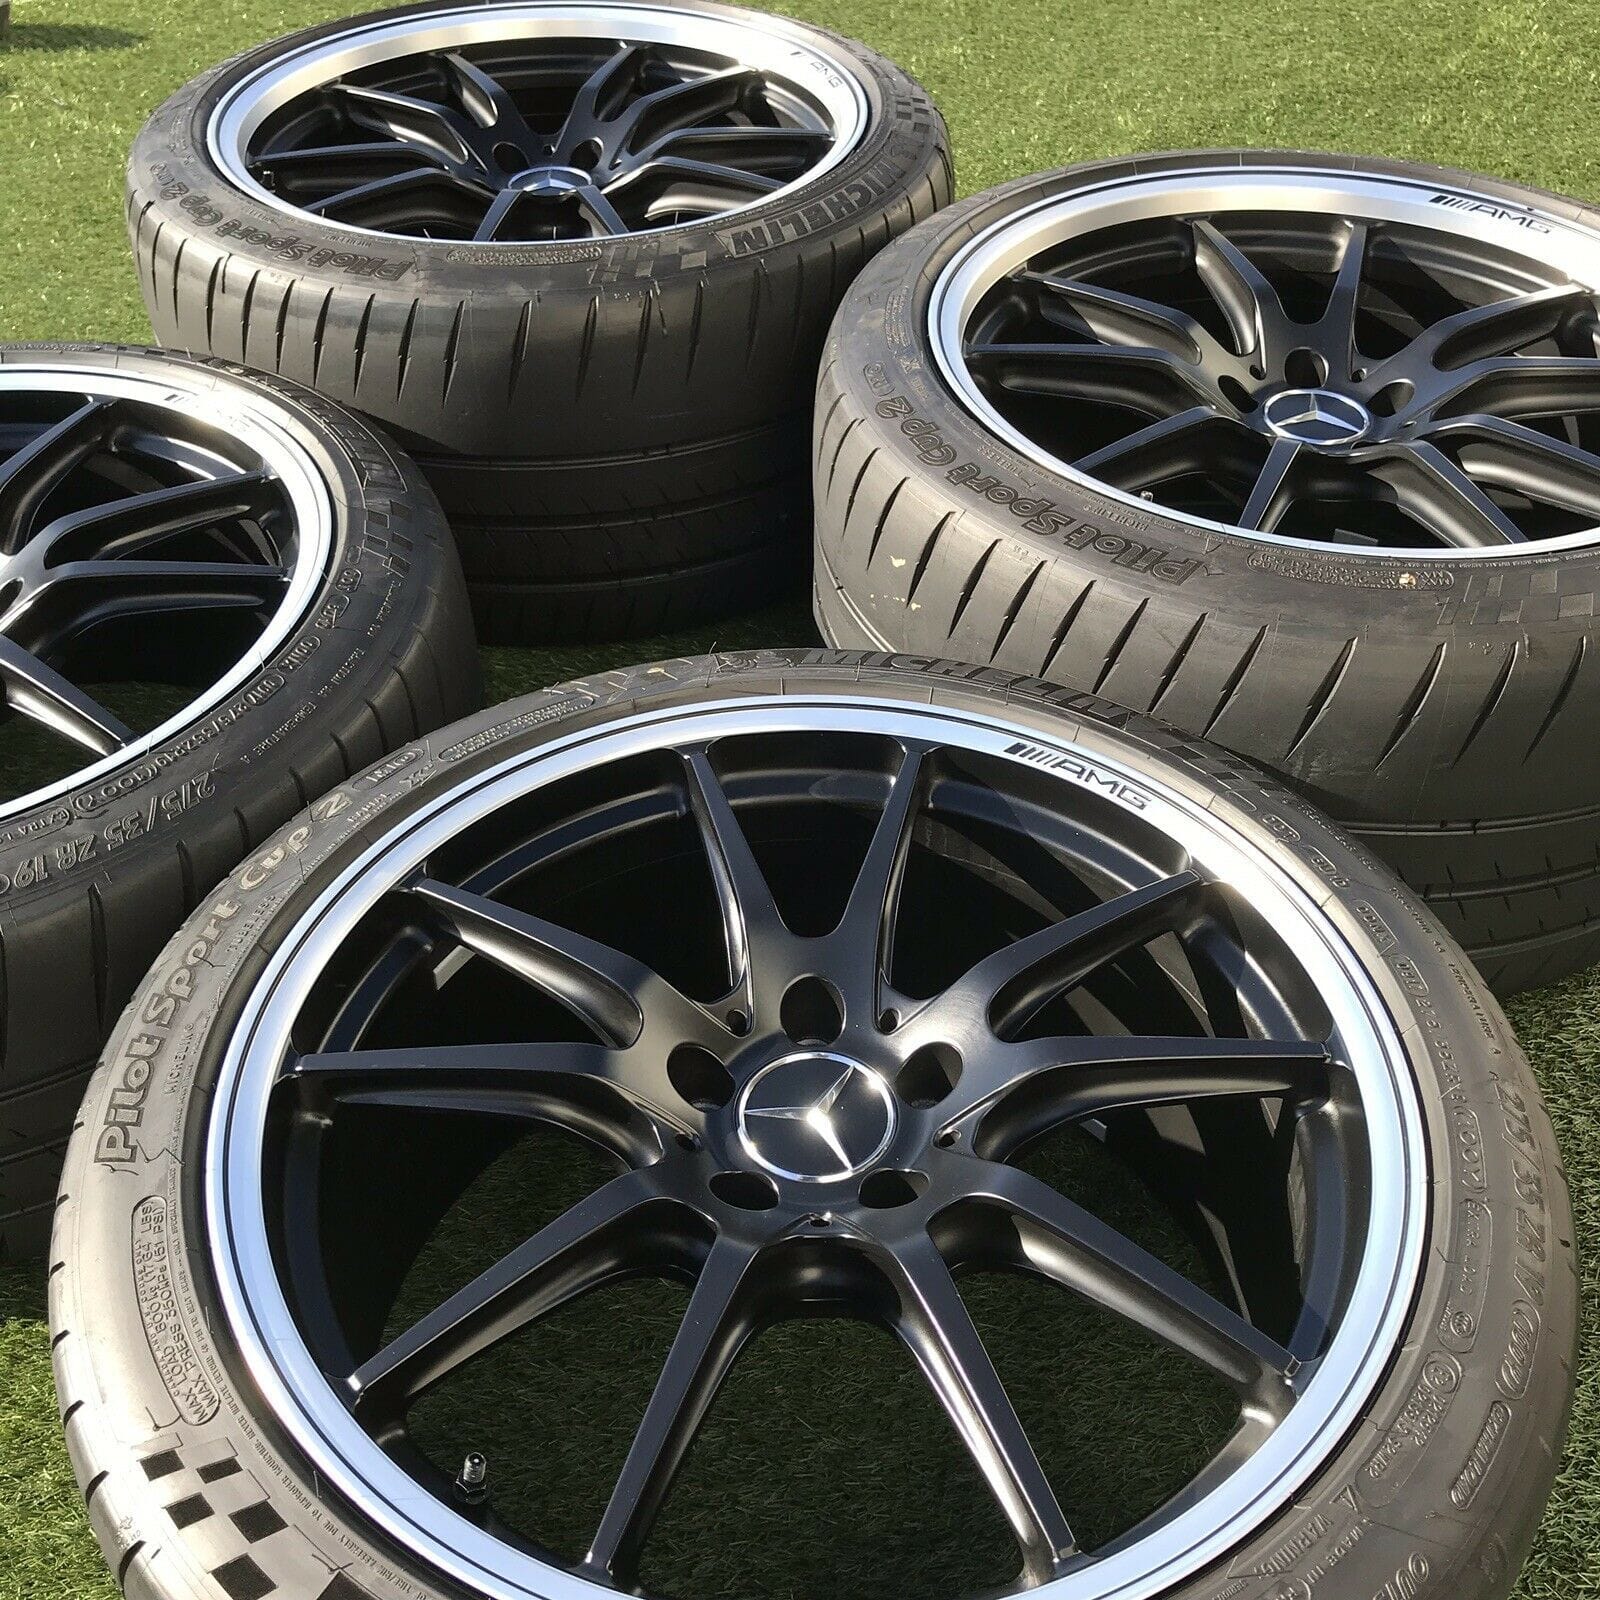 Wheels and Tires/Axles - 19" 20" Mercedes AMG OEM Wheels & Tires (Willing to remove tires) - Used - Corona, CA 92882, United States